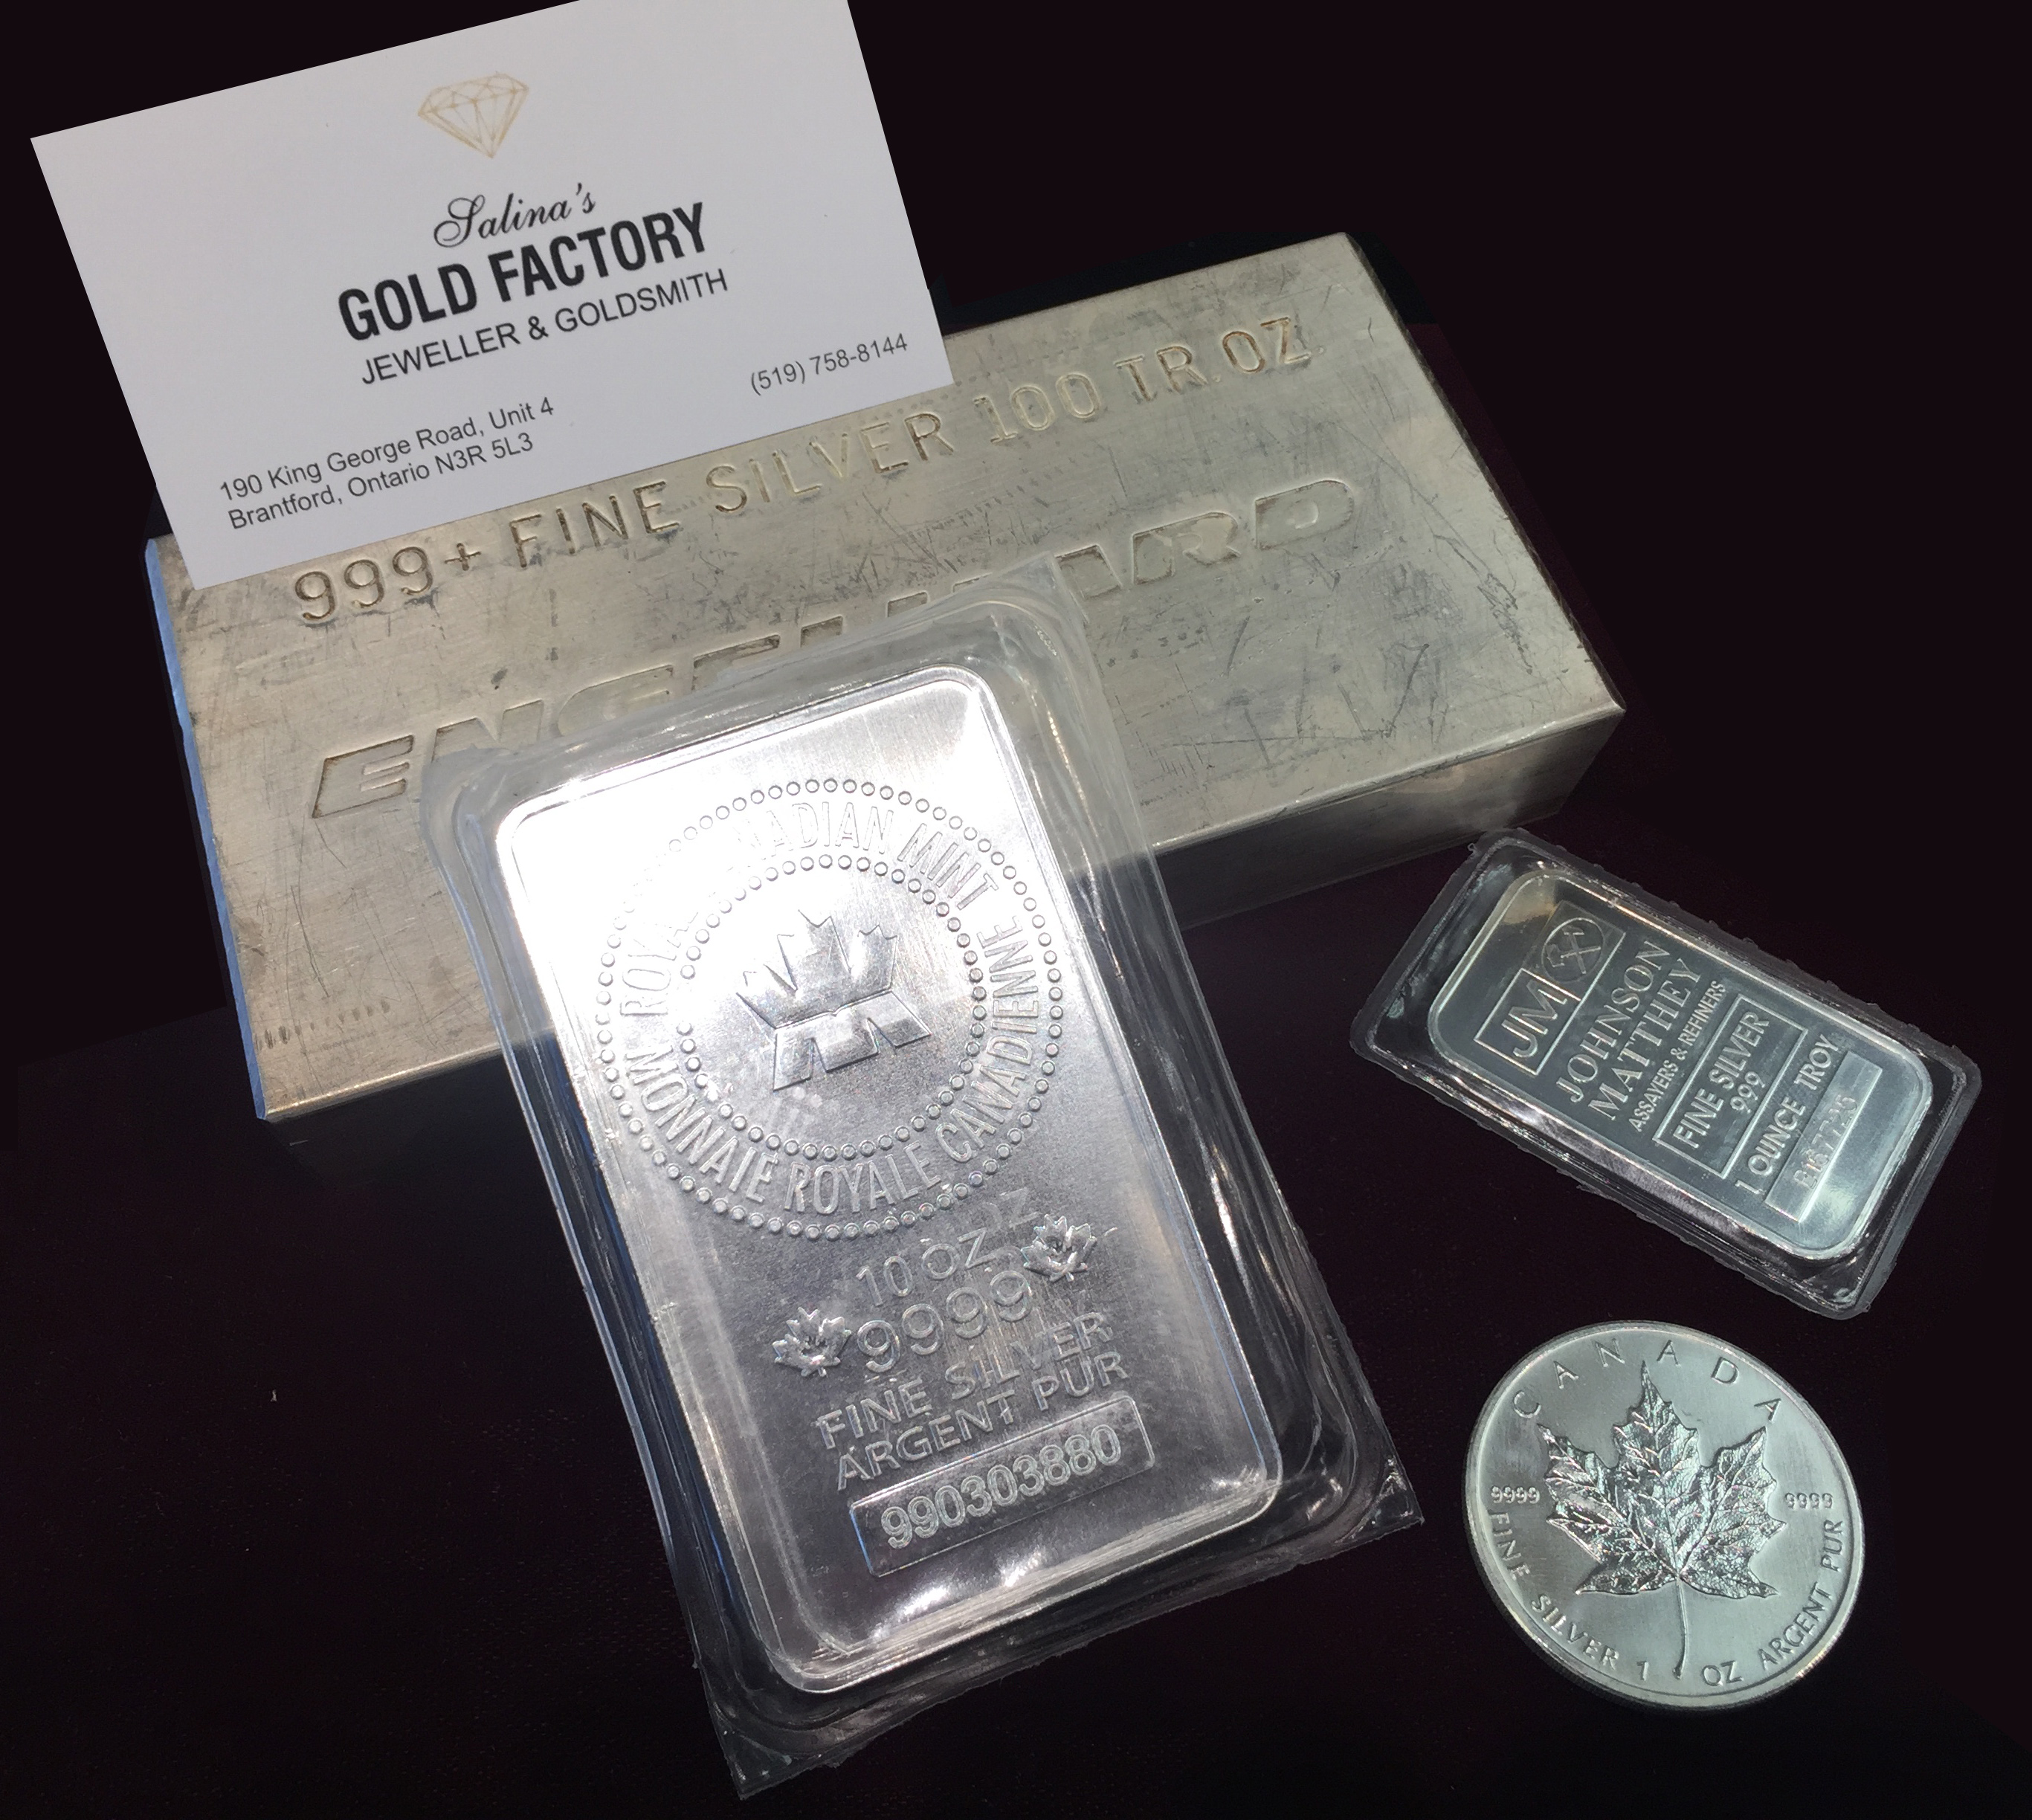 Gold Factory Brantford - Gold and Silver Bars Buy or Sell